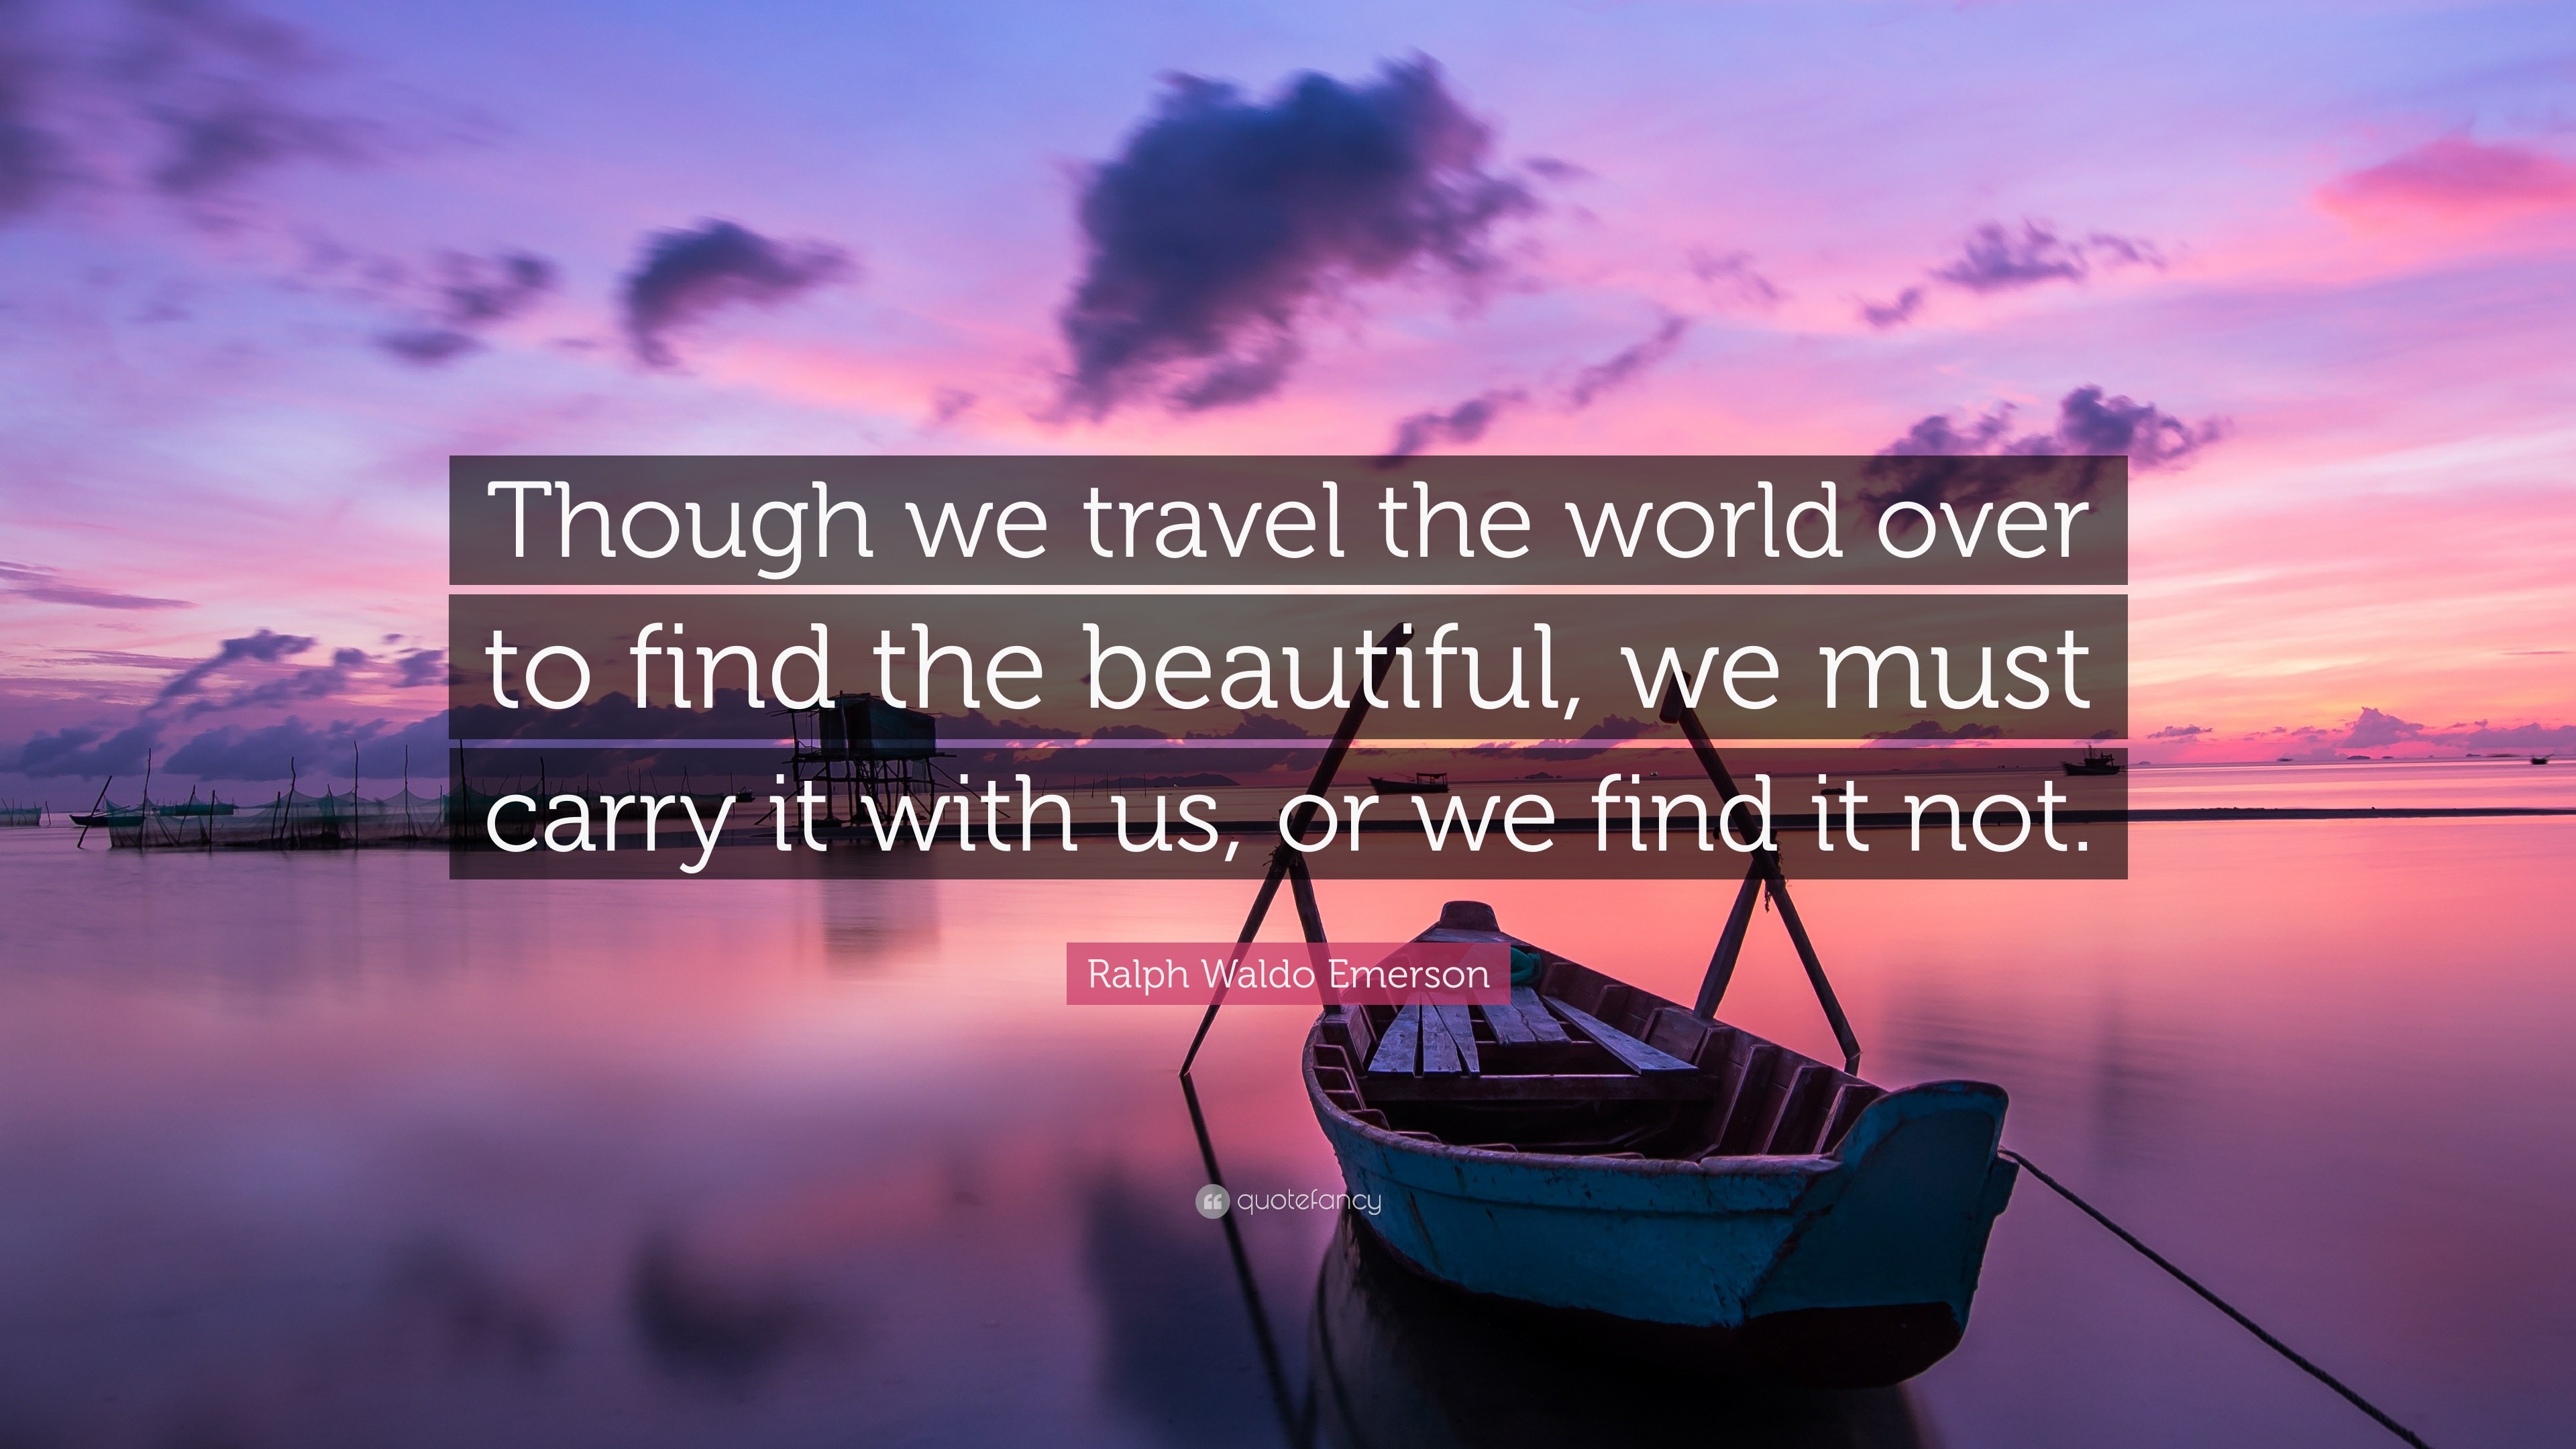 Ralph Waldo Emerson Quote: “Though we travel the world over to find the